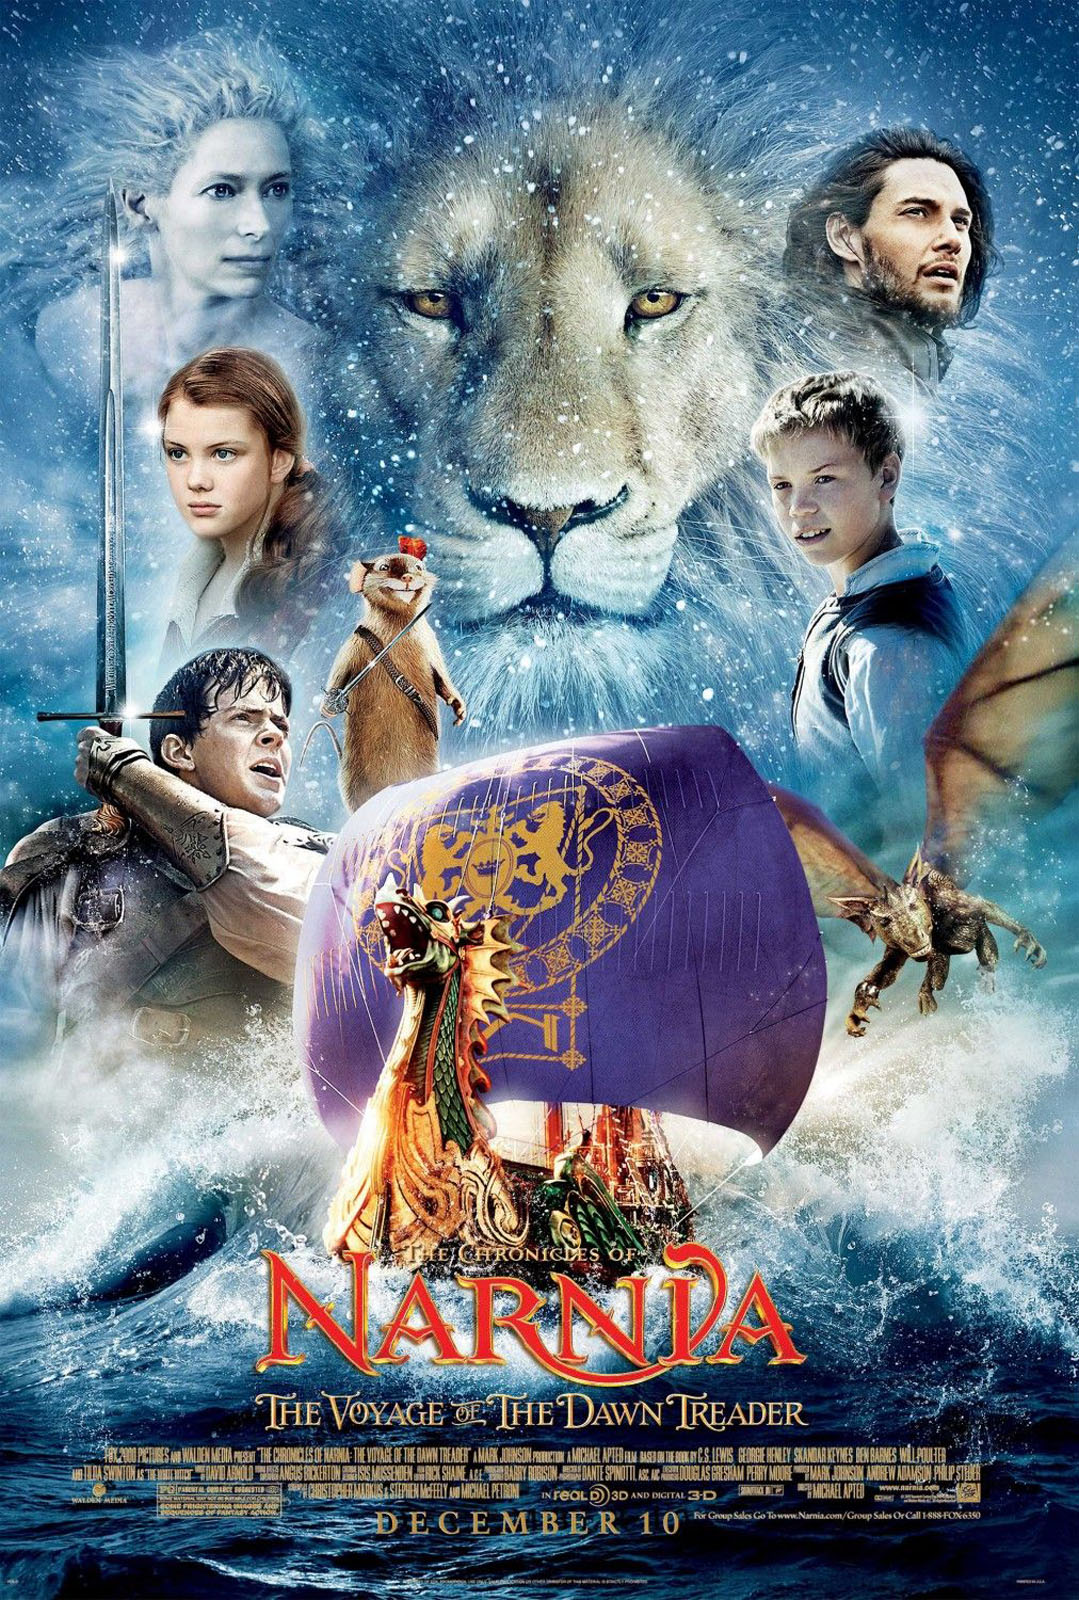 CHRONICLES OF NARNIA: THE VOYAGE OF THE DAWN TREADER, THE